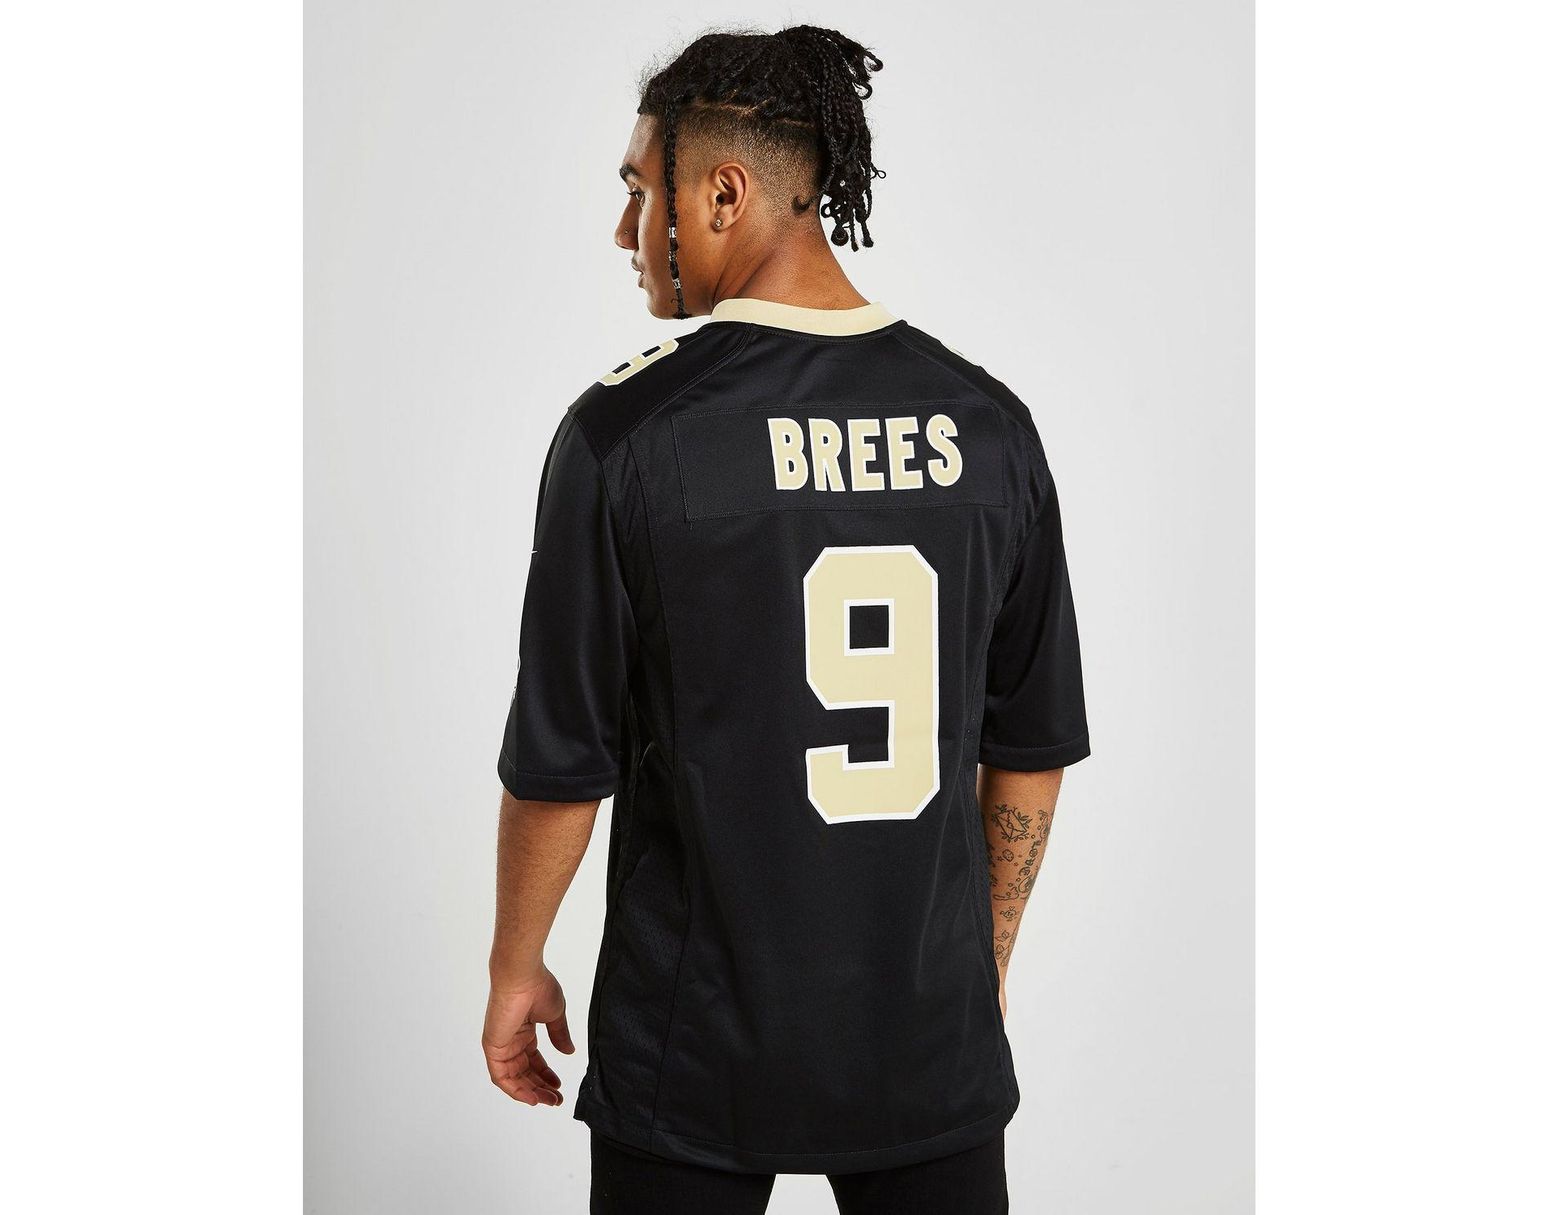 brees 9 jersey